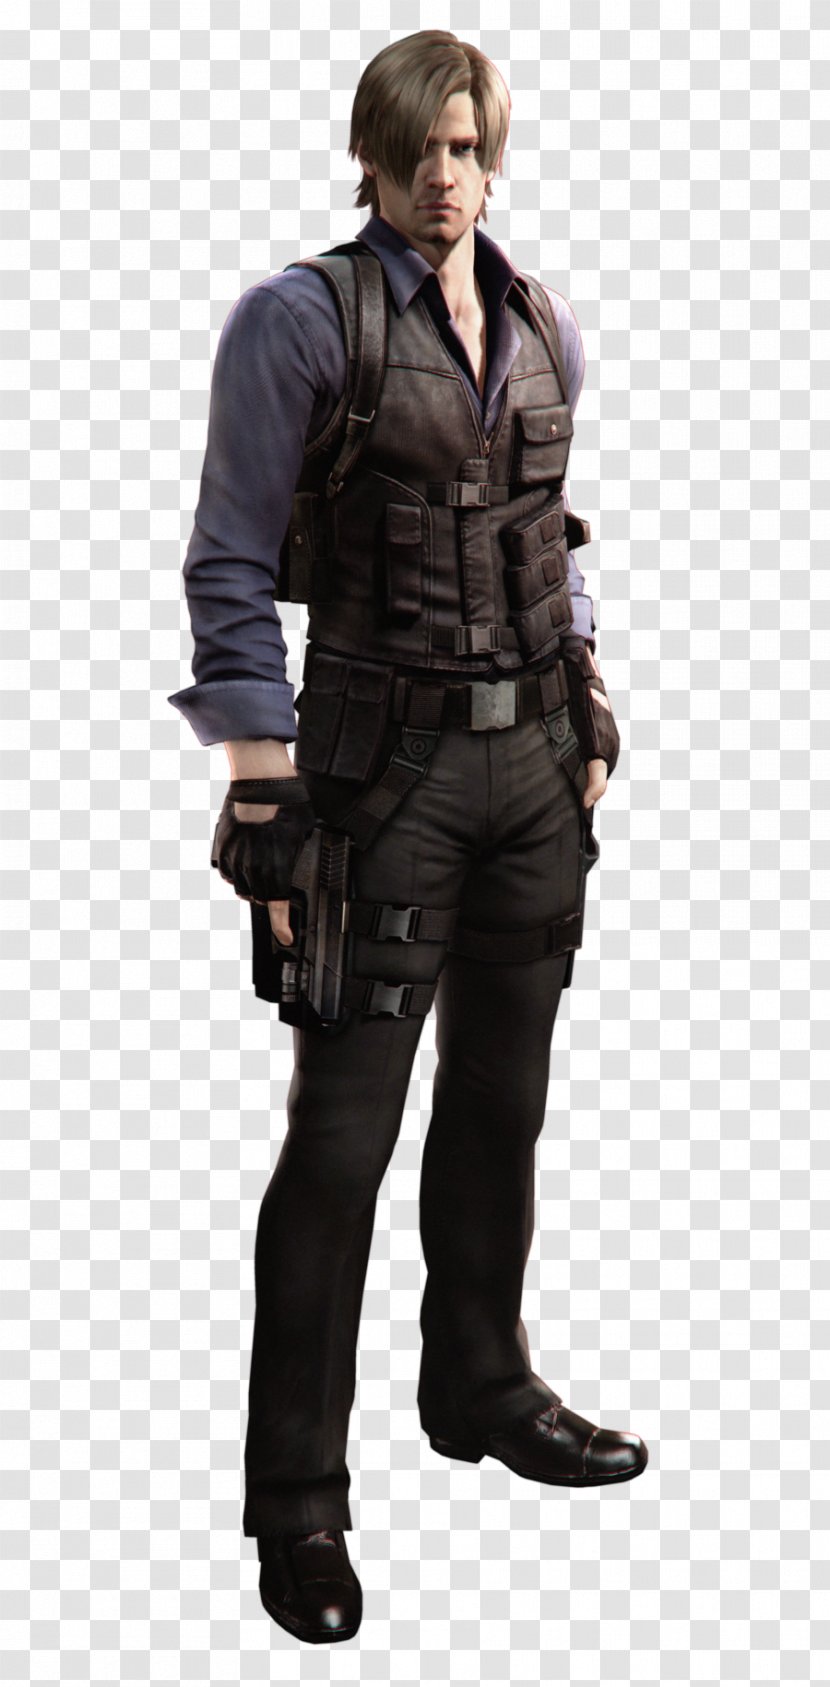 Resident Evil 6 2 Leon S. Kennedy Ada Wong 5 Transparent PNG